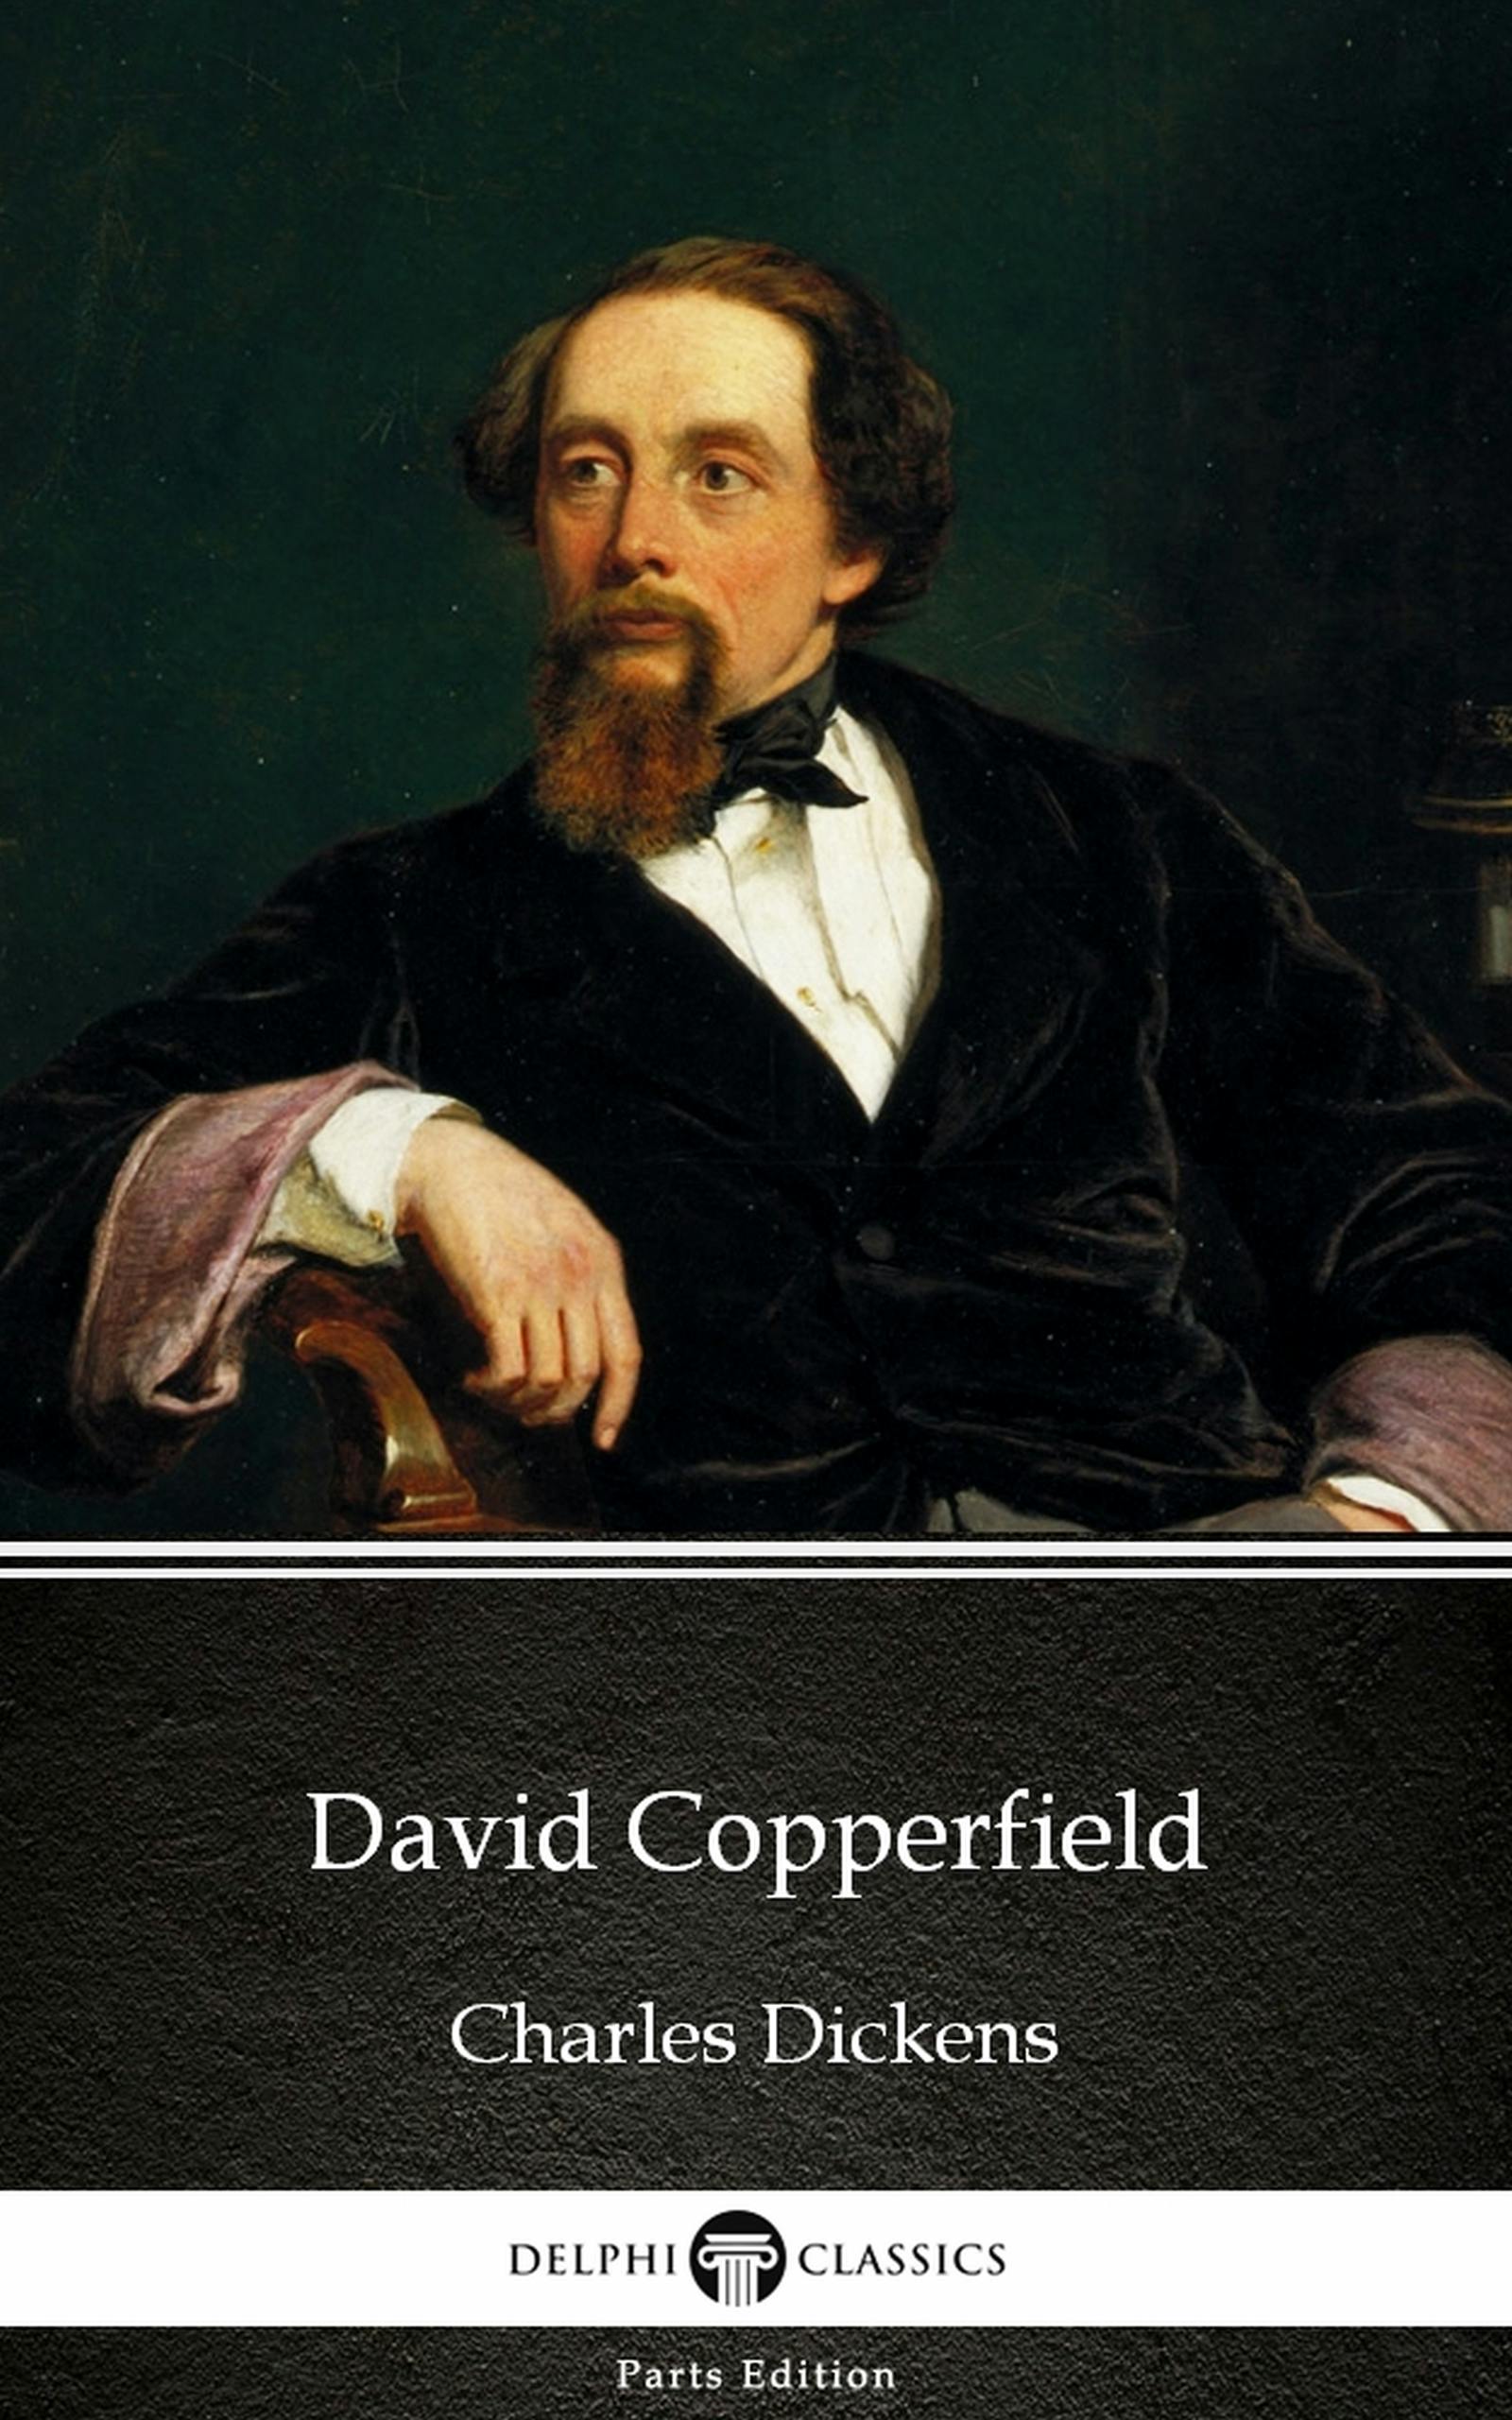 David Copperfield by Charles Dickens - Delphi Classics (Illustrated) - Charles Dickens